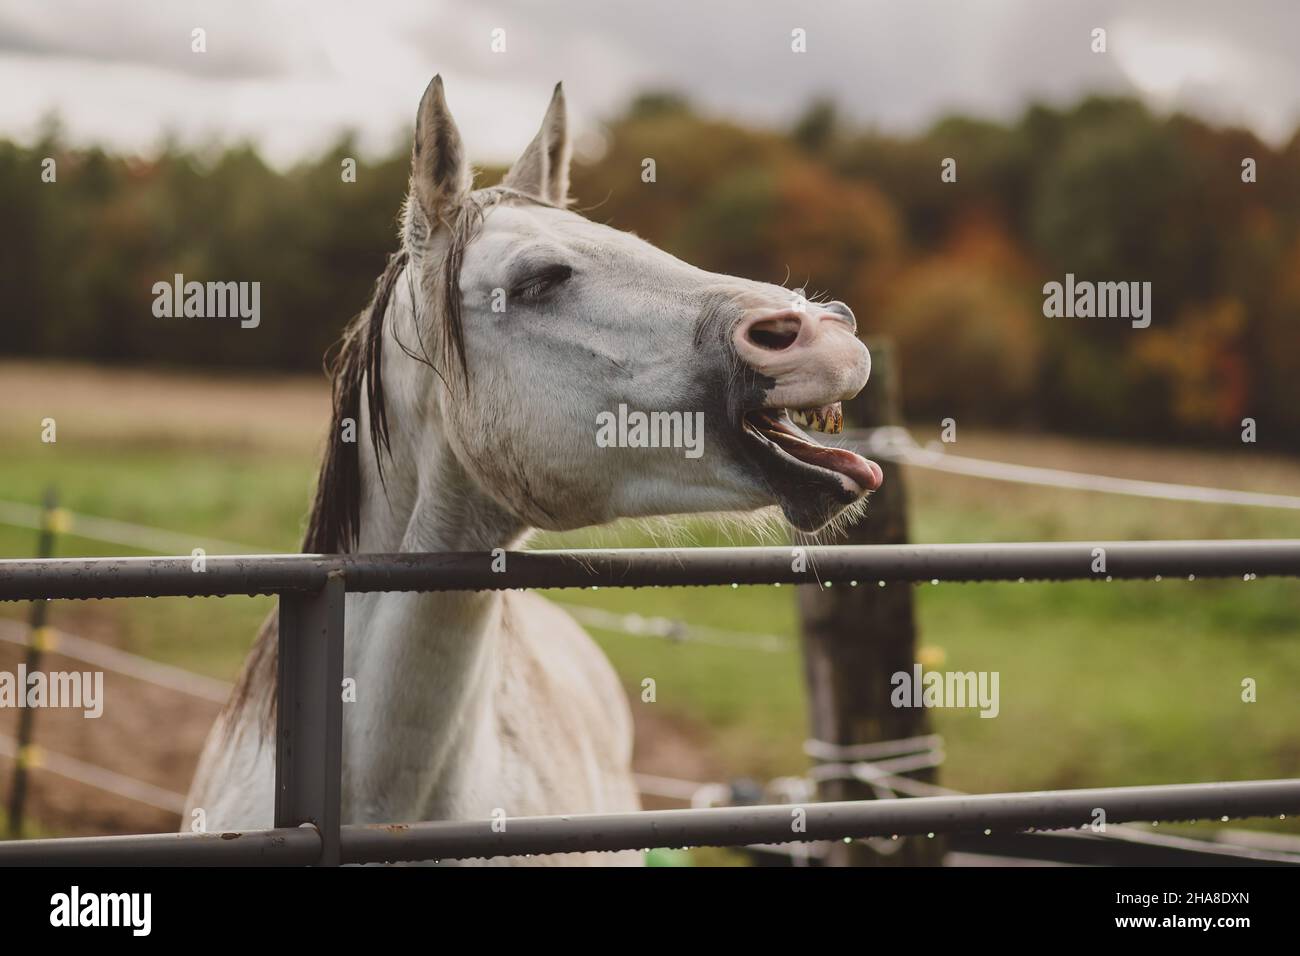 White horse yawing and whinnying for food by gate Stock Photo